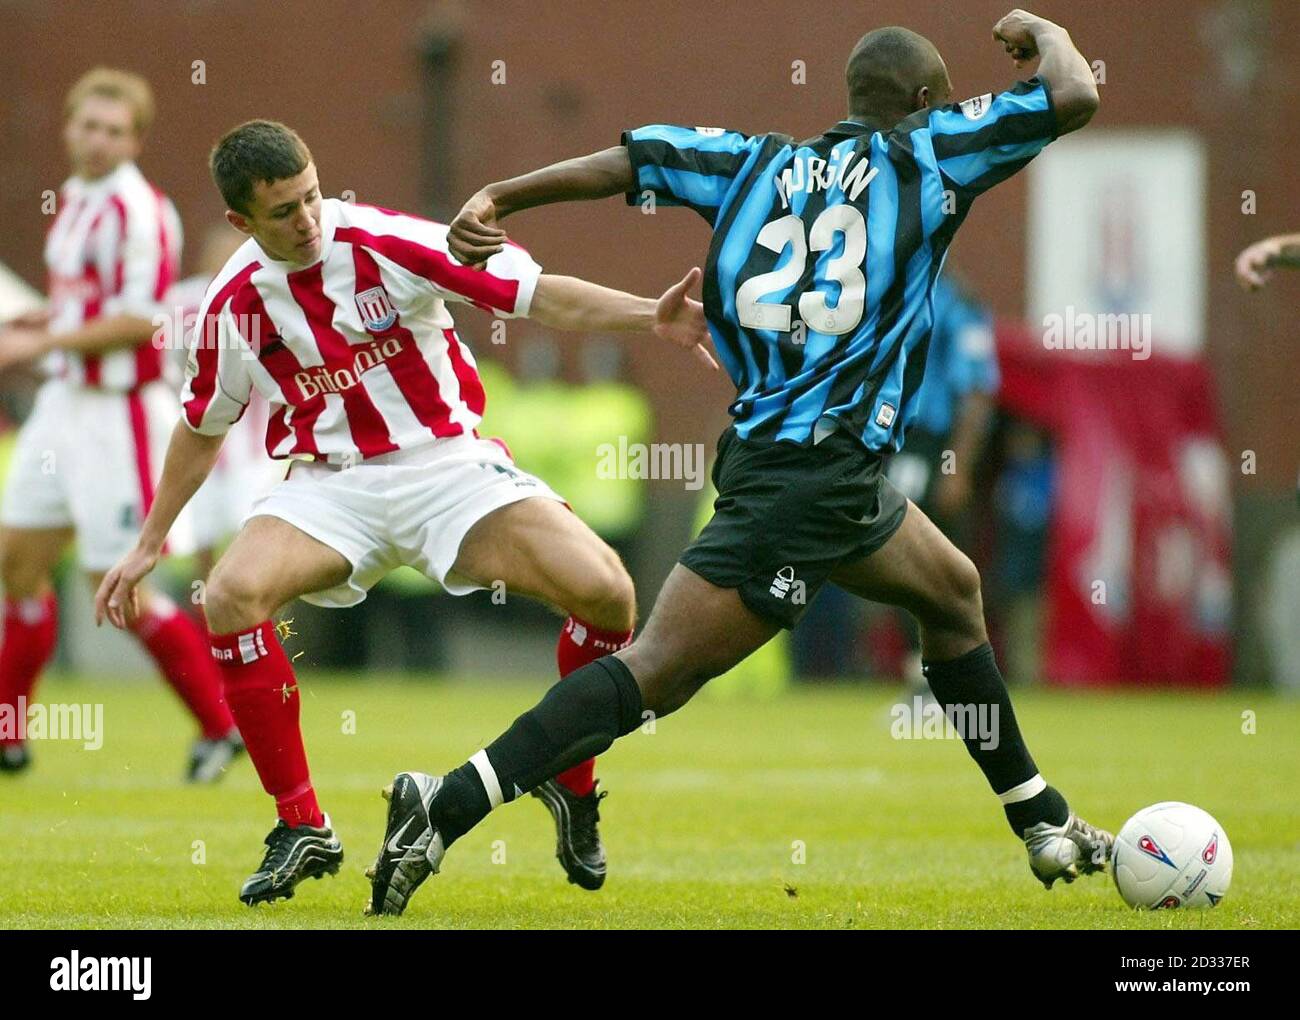 Nottingham Forest's Wes Morgan (right) breaks away from Lewis Neal of Stoke City, during their Nationwide Division One match at the Britannia Stadium, Stoke. Final score: Stoke City 2, Nottingham Forest 1.   THIS PICTURE CAN ONLY BE USED WITHIN THE CONTEXT OF AN EDITORIAL FEATURE. NO UNOFFICIAL CLUB WEBSITE USE. Stock Photo